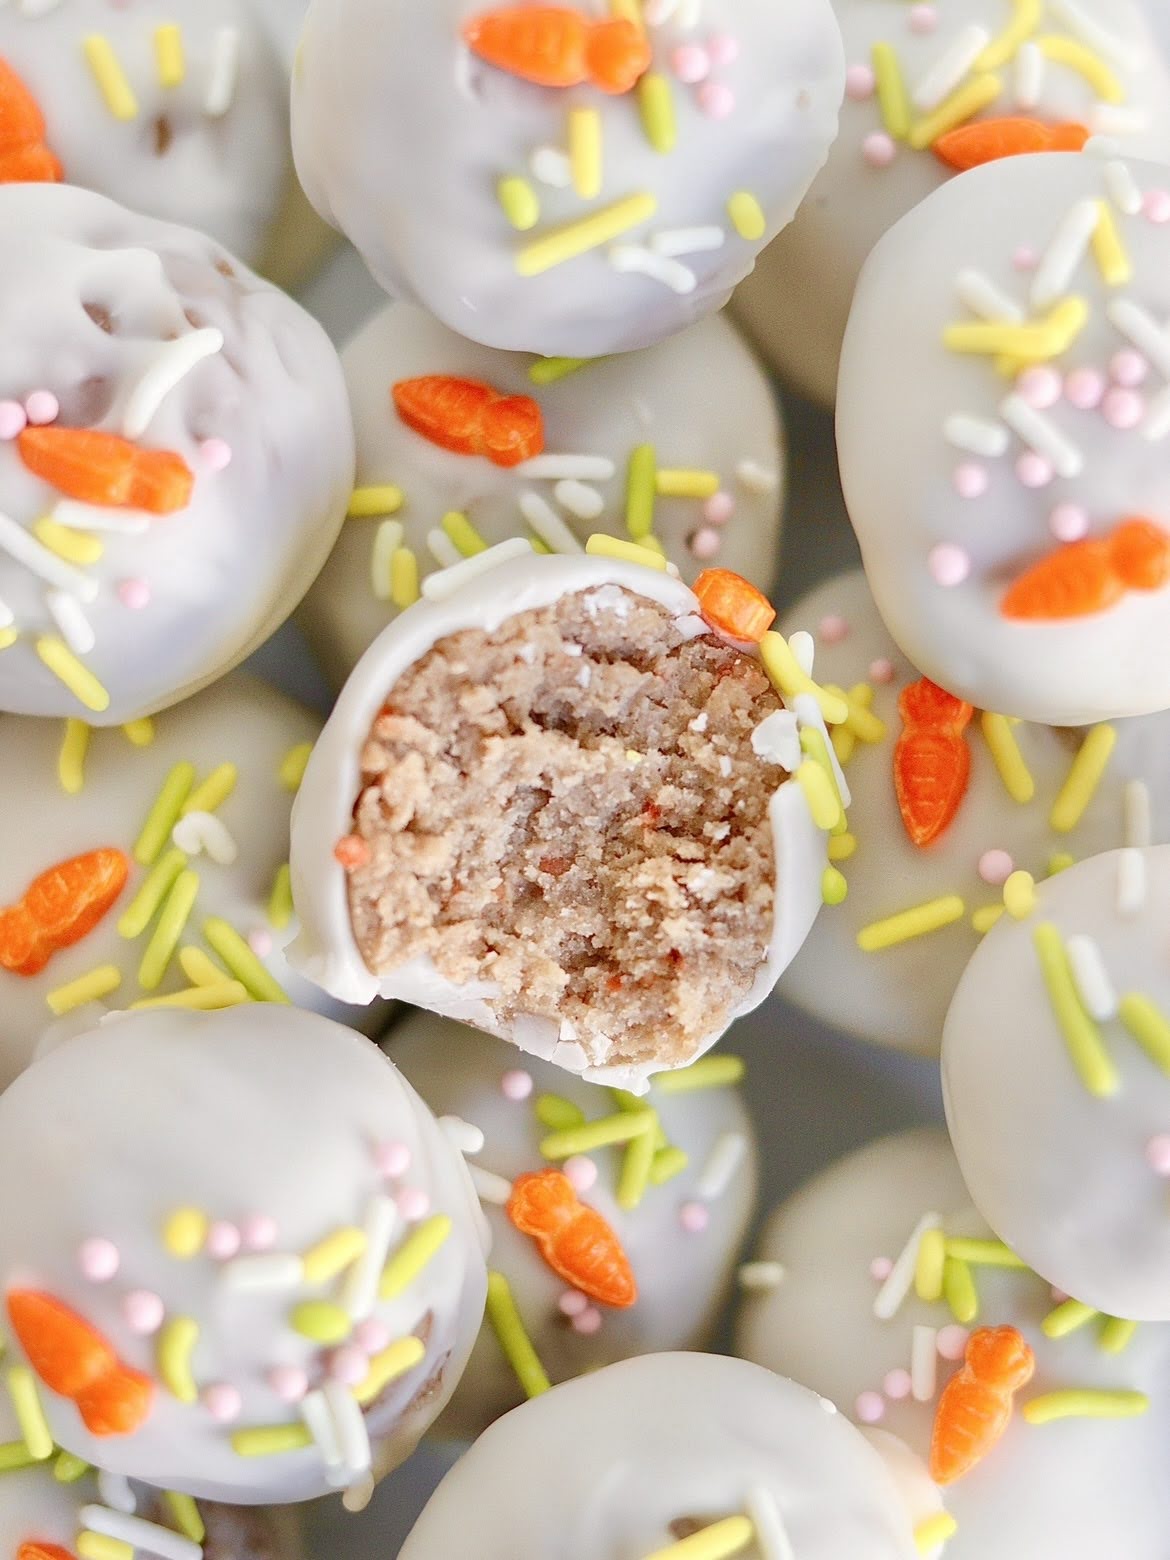 A final photo of a carrot cake truffle with a bite taken out of it, coated in white chocolate and sprinkles.